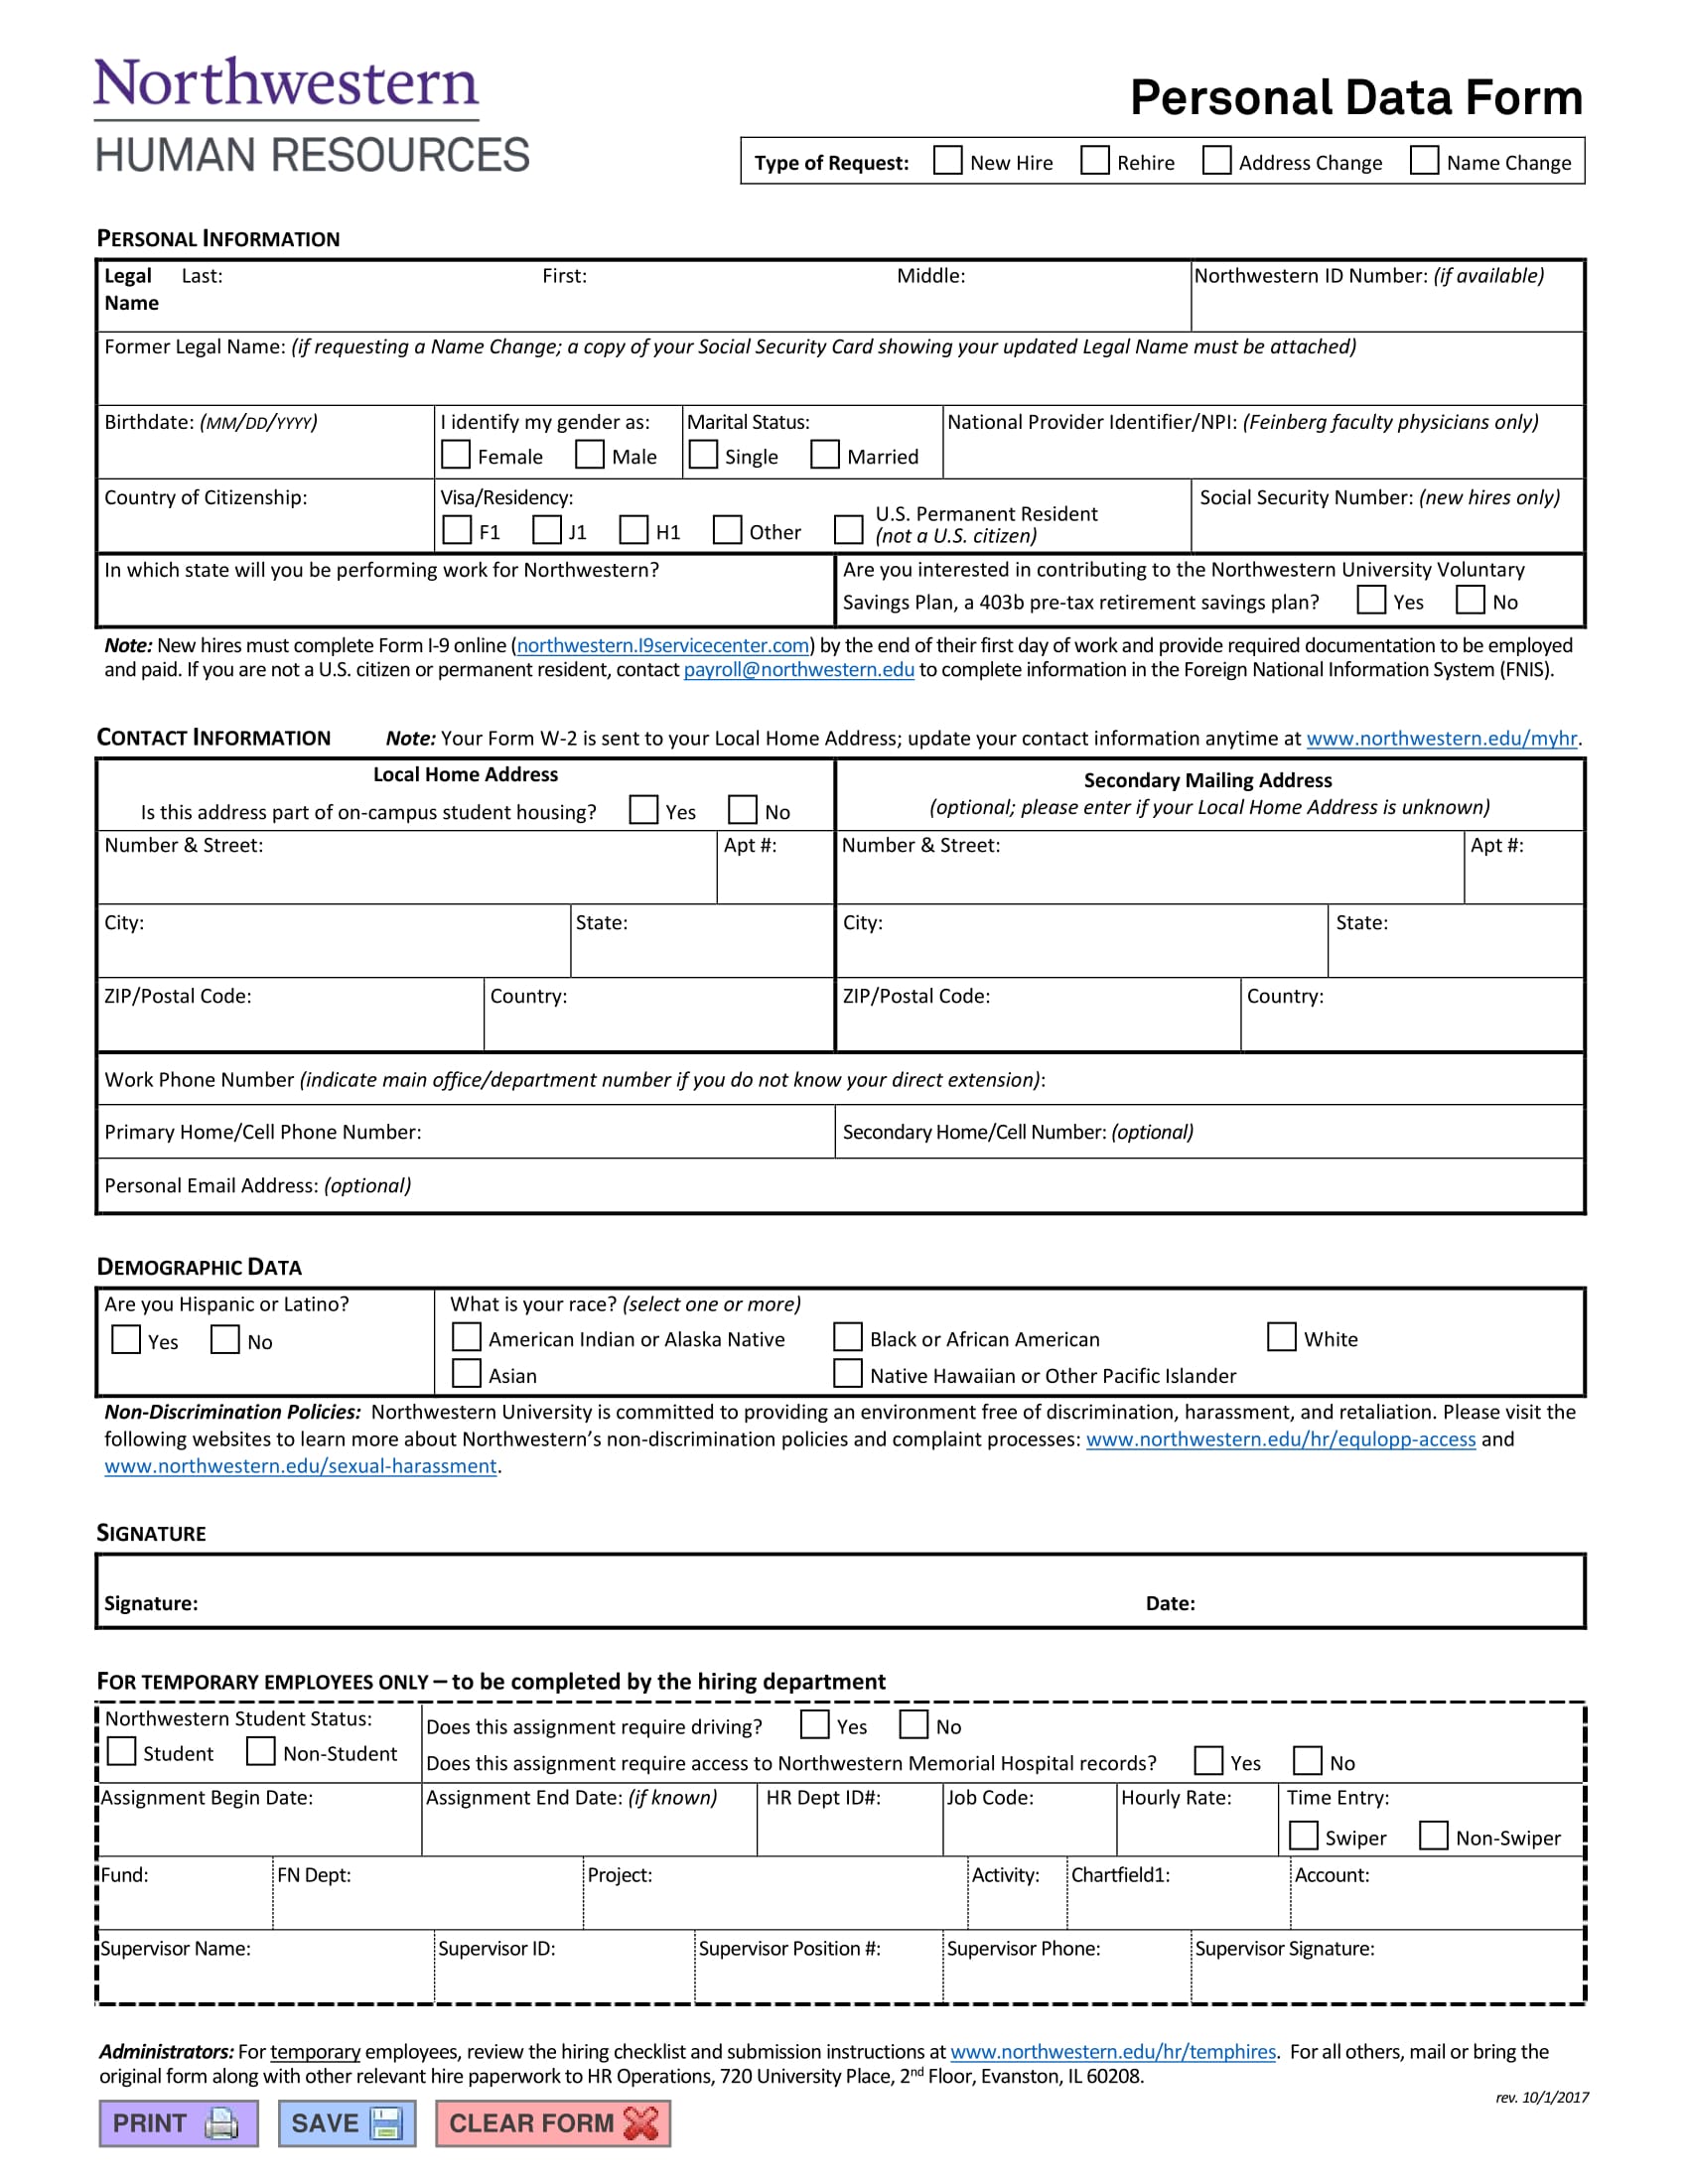 fillable personal data form 1